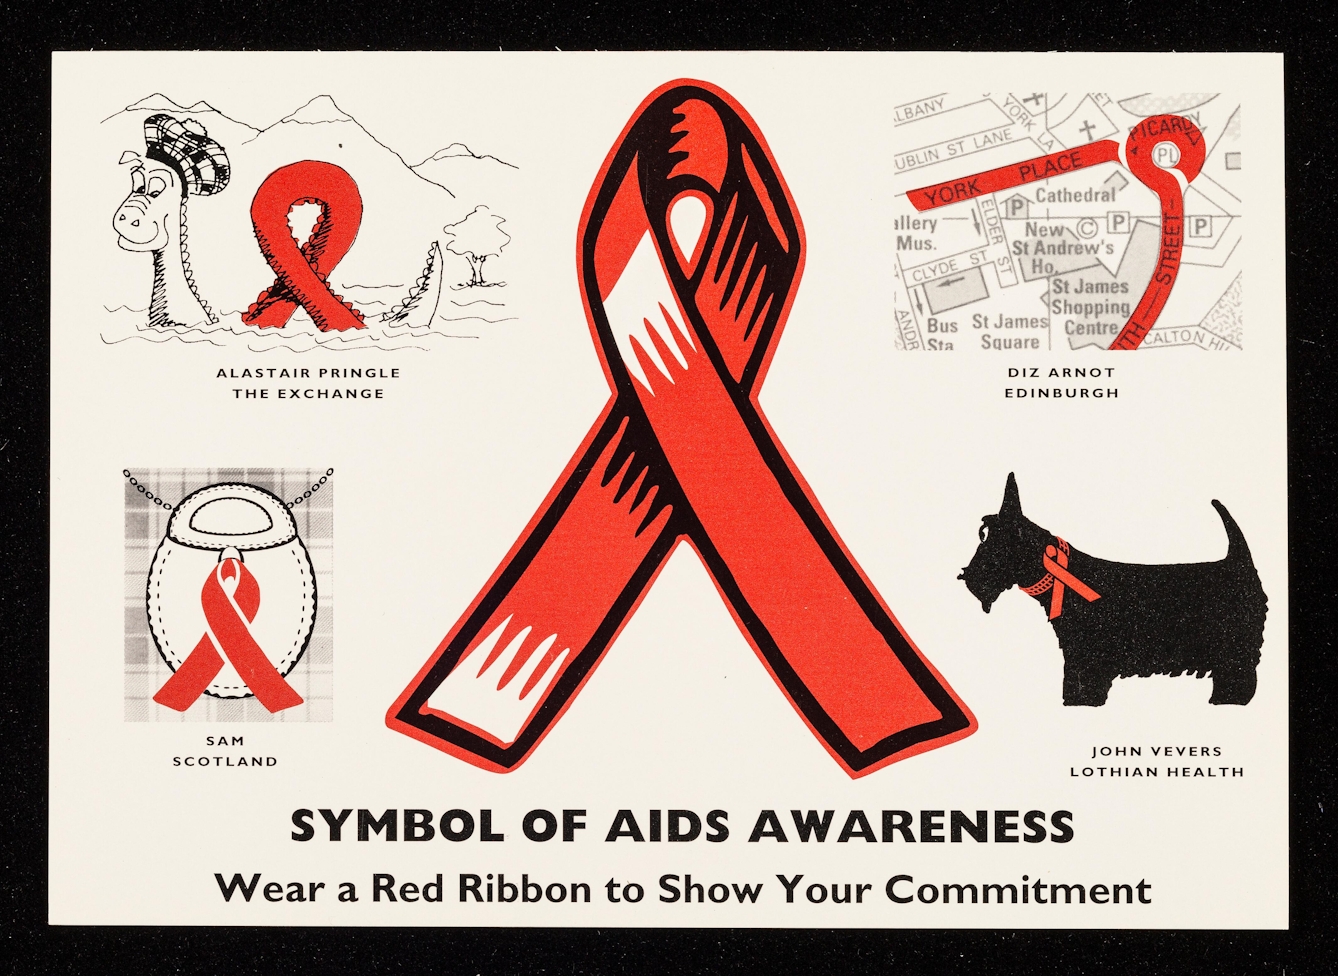 Postcard in black, white and red showing various scottish symbols with red ribbons, the symbol of aids awareness, picked out on them. There is a sporran, a loch ness monster, a map image of Picardy Place roundabout, and a Scottish terrier with a red collar. 